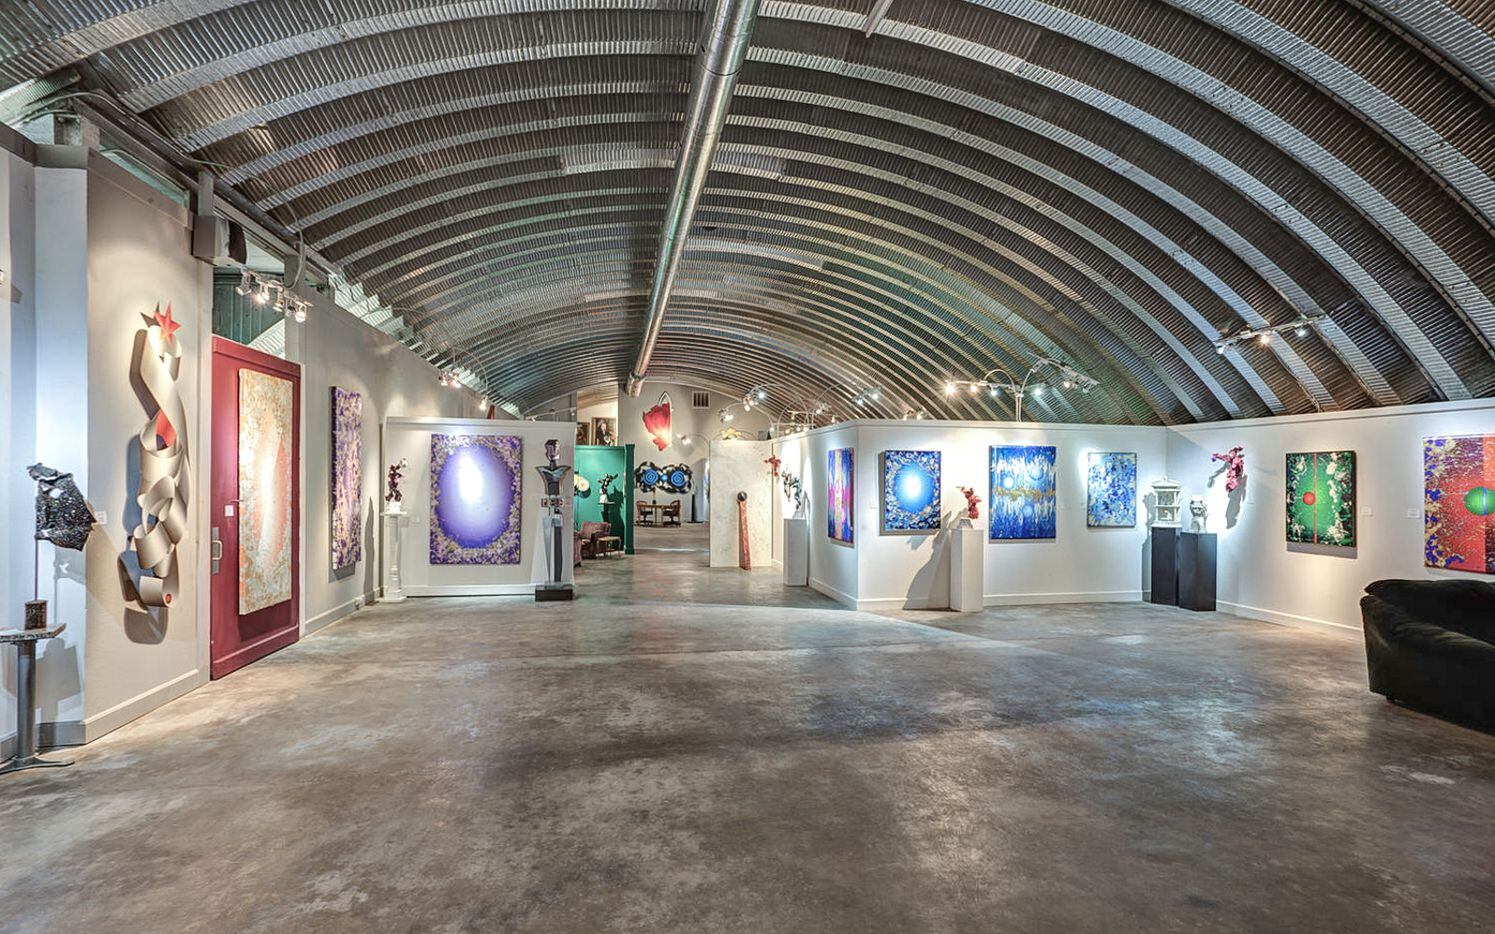 Benini and his wife Lorraine transformed a 12,000-square-foot hanger on the property into art galleries and an educational venue.